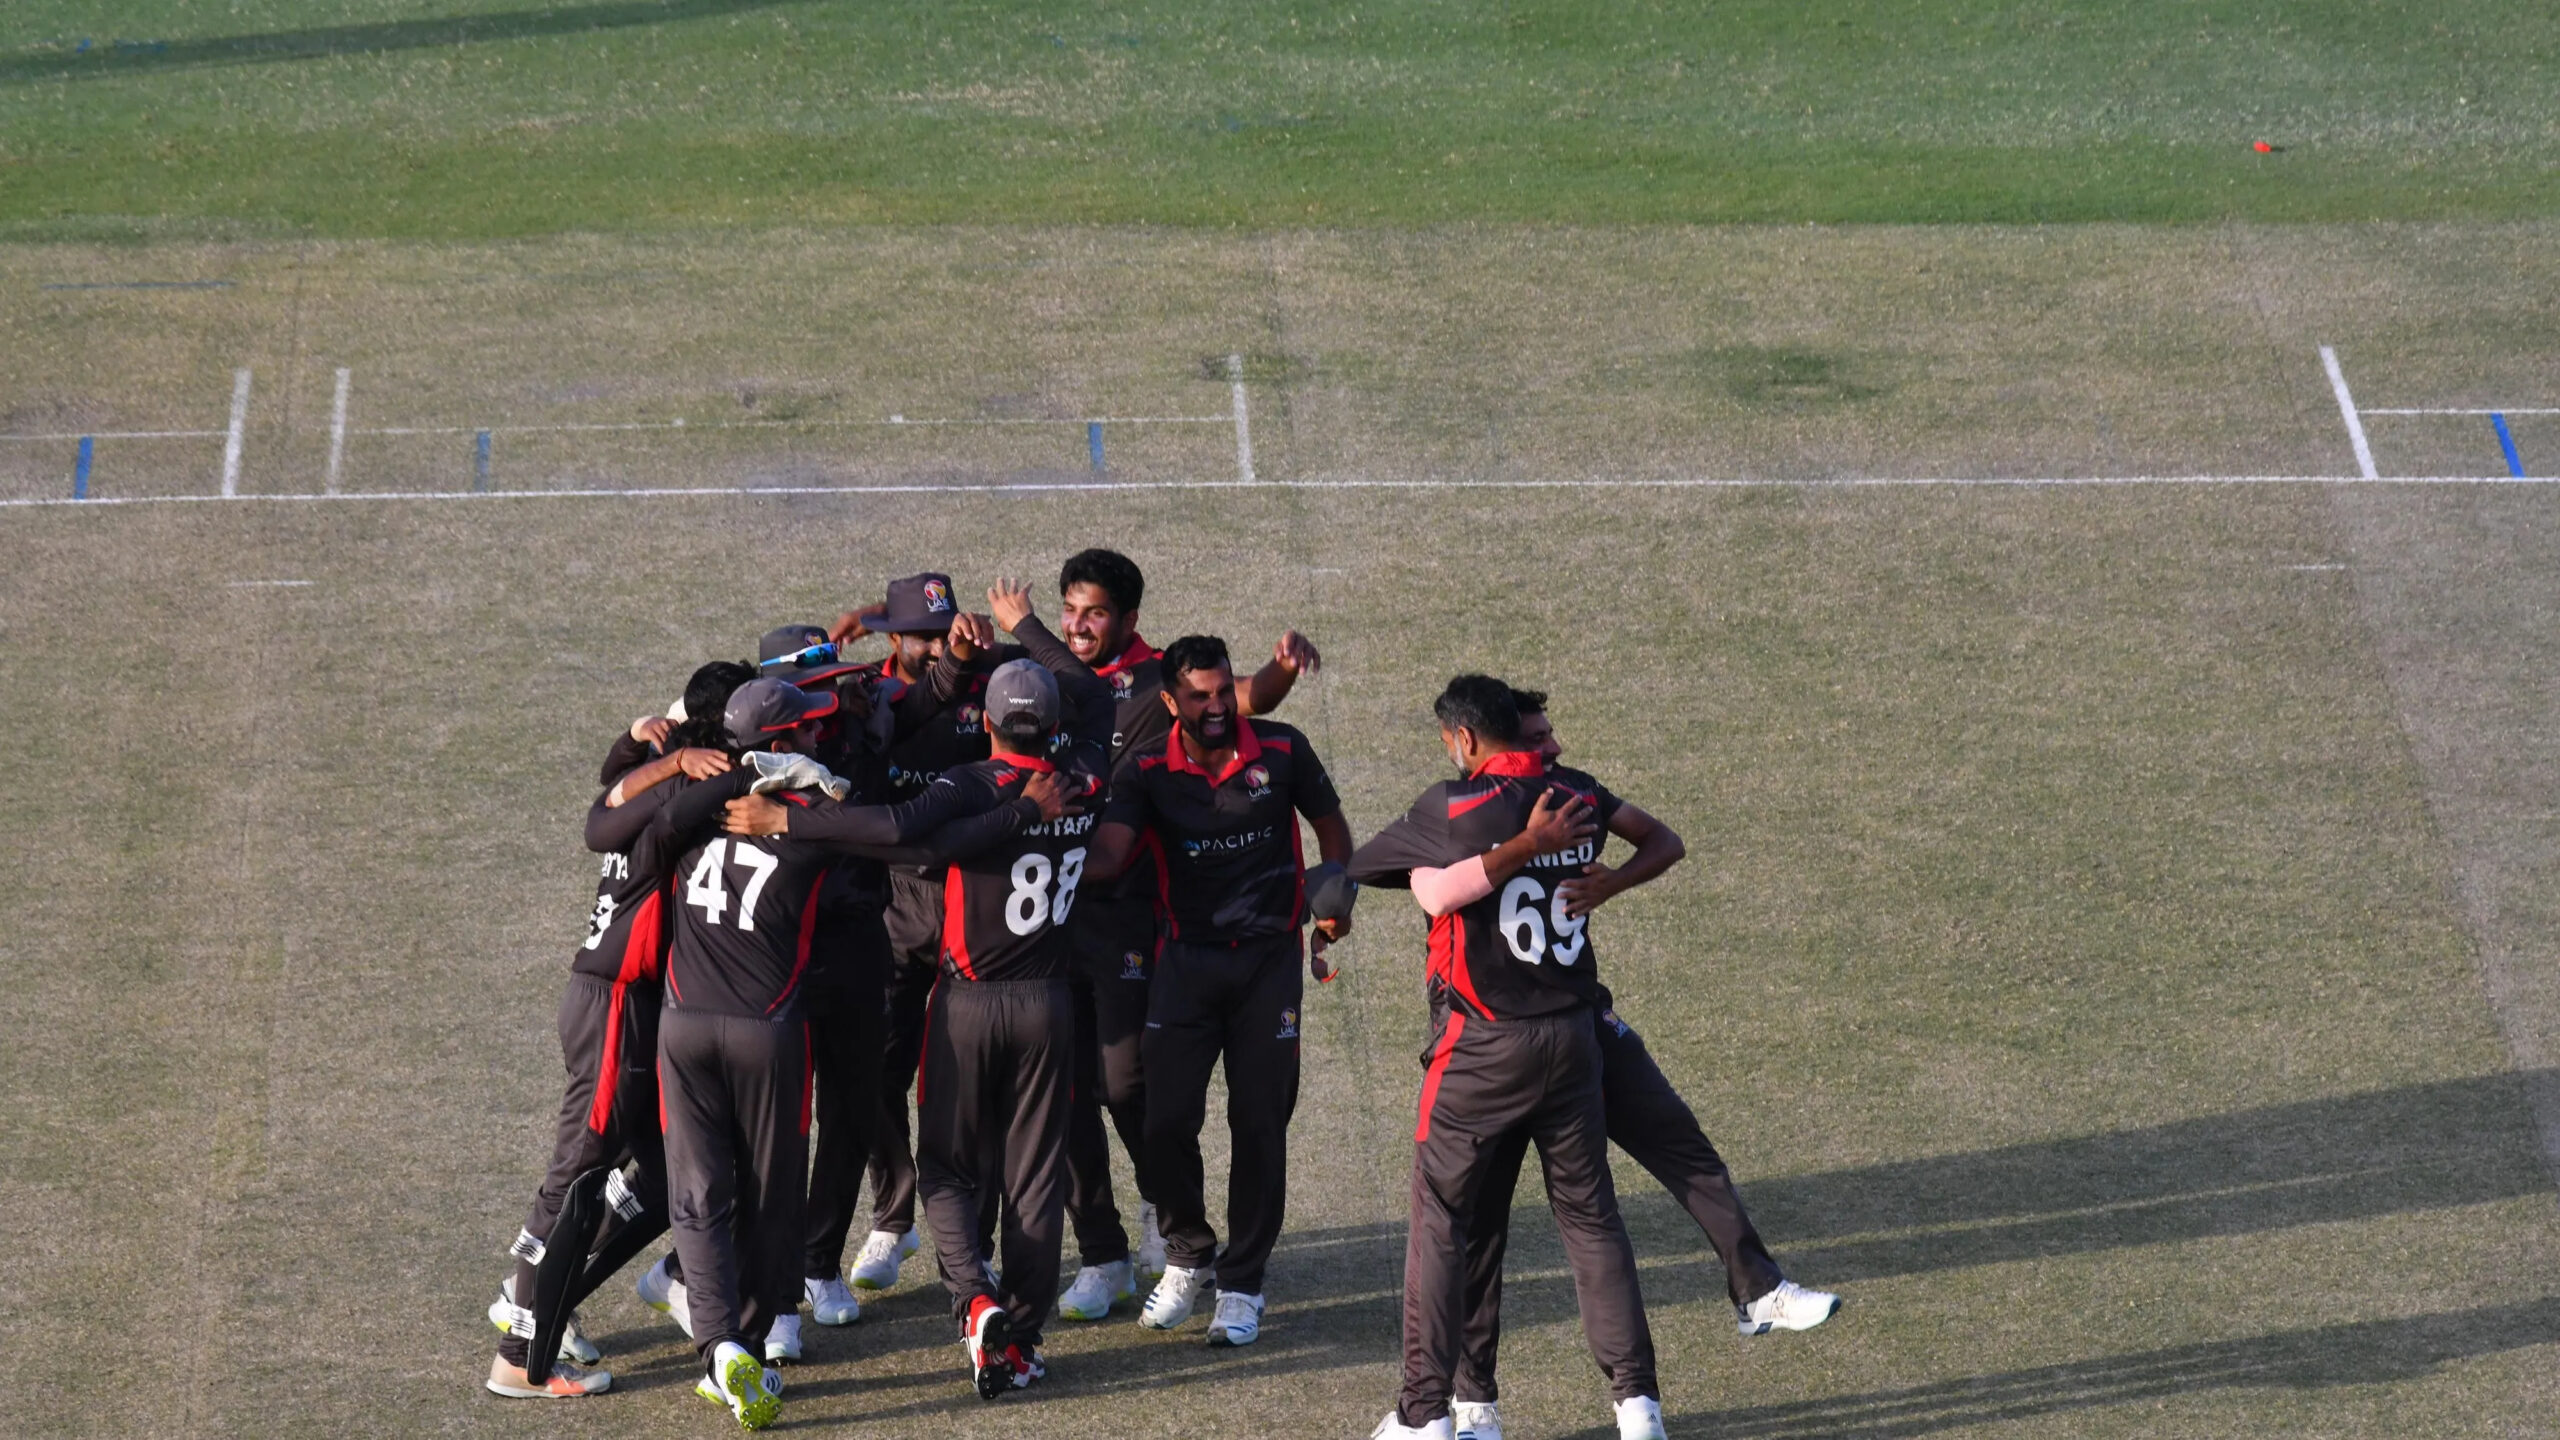 UAE Celebrates after qulaifying for T20 World Cup 2022. Photo- ICC